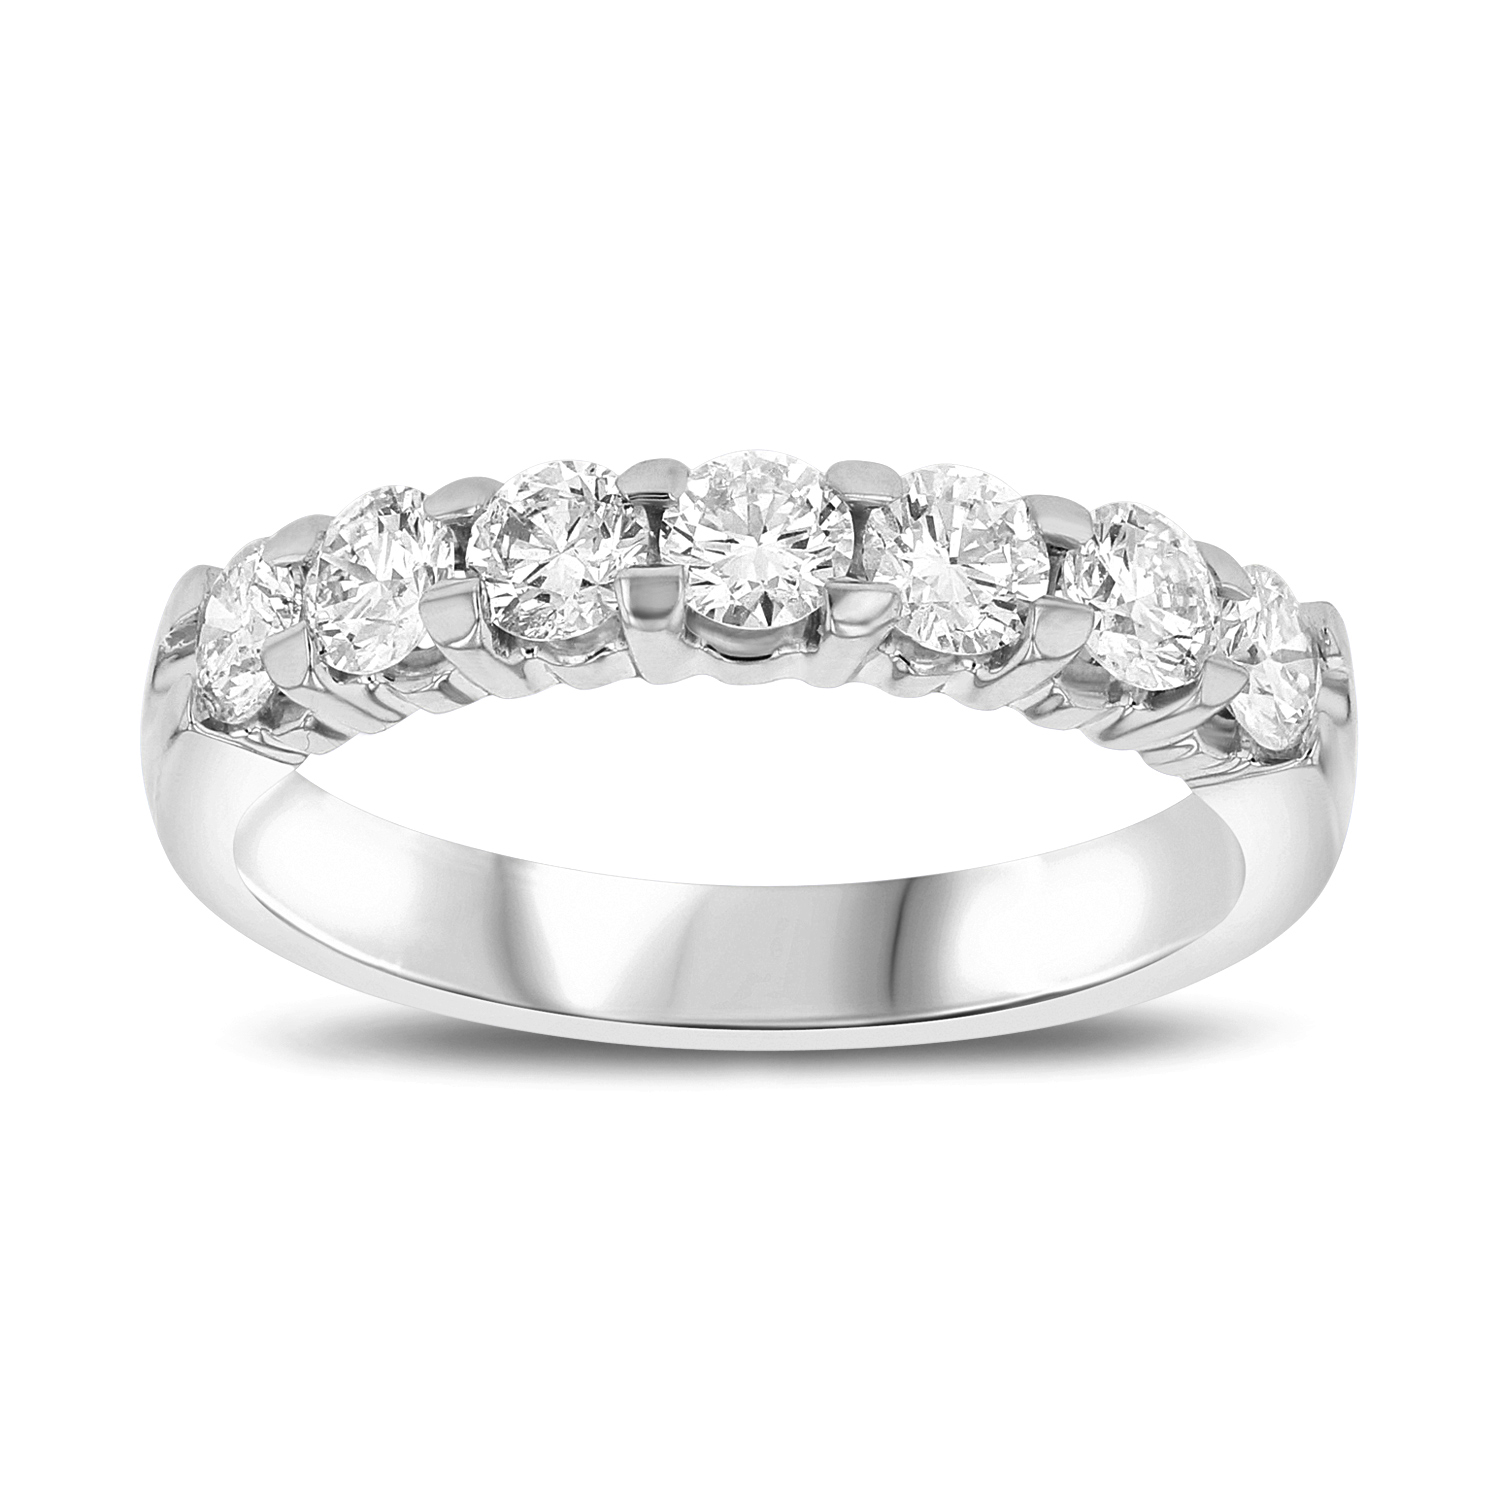 View 1.00ct tw 7 Stone Round Diamonds Shared Prong Anniversary or Wedding Band 14k Gold Bridal Ring H-J, SI